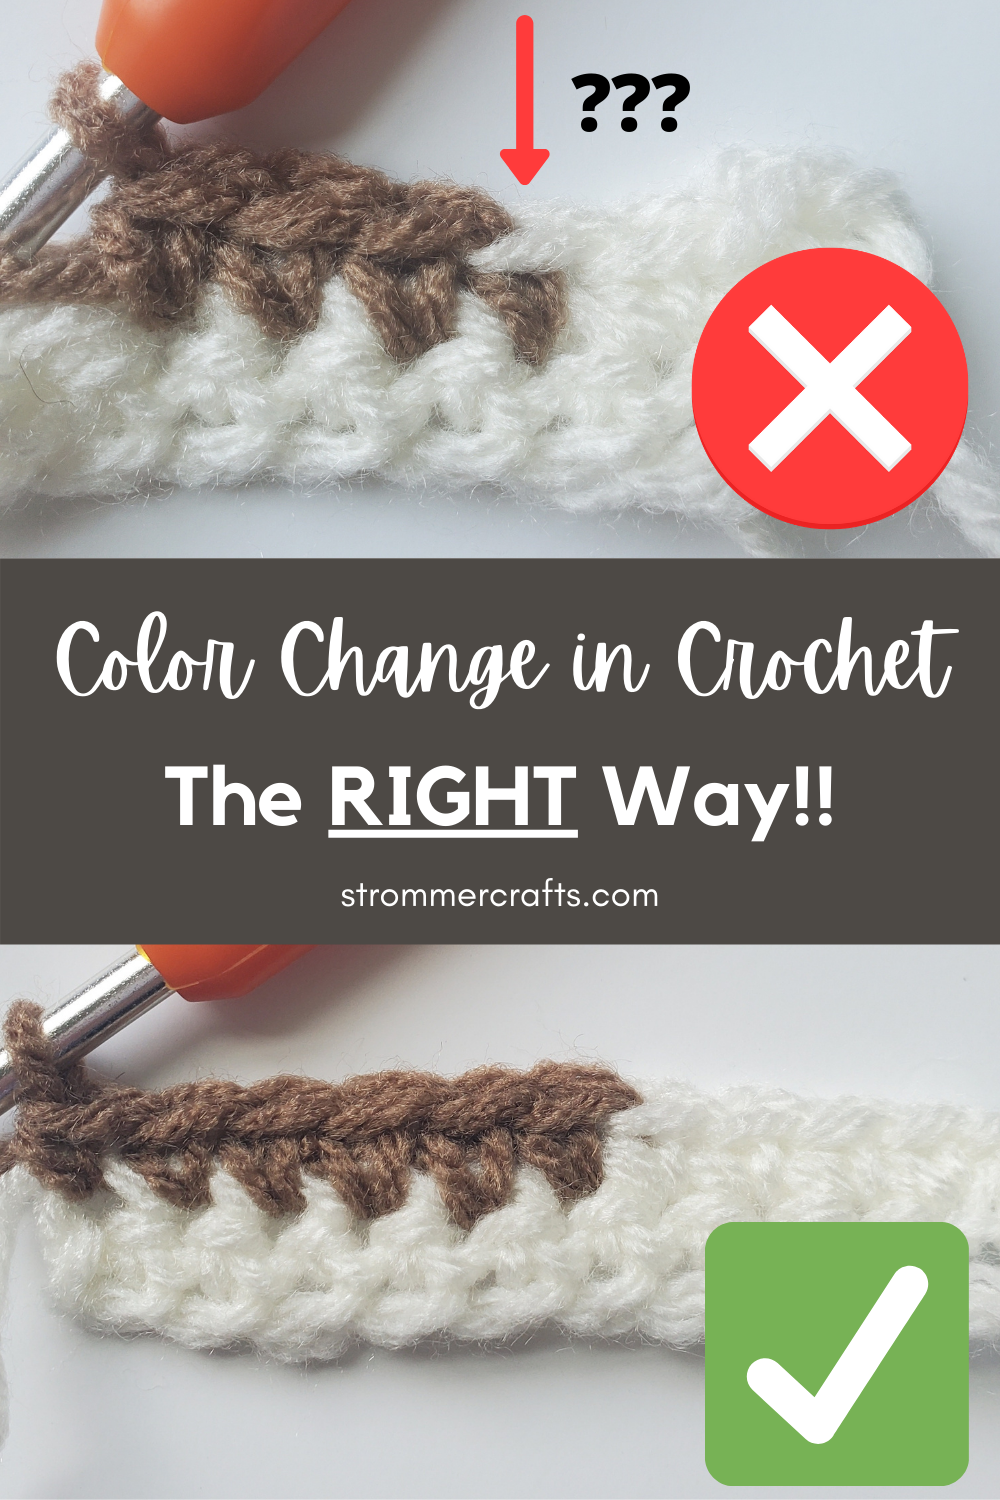 How to Crochet with Black Yarn: 12 Game Changing Tips for Your